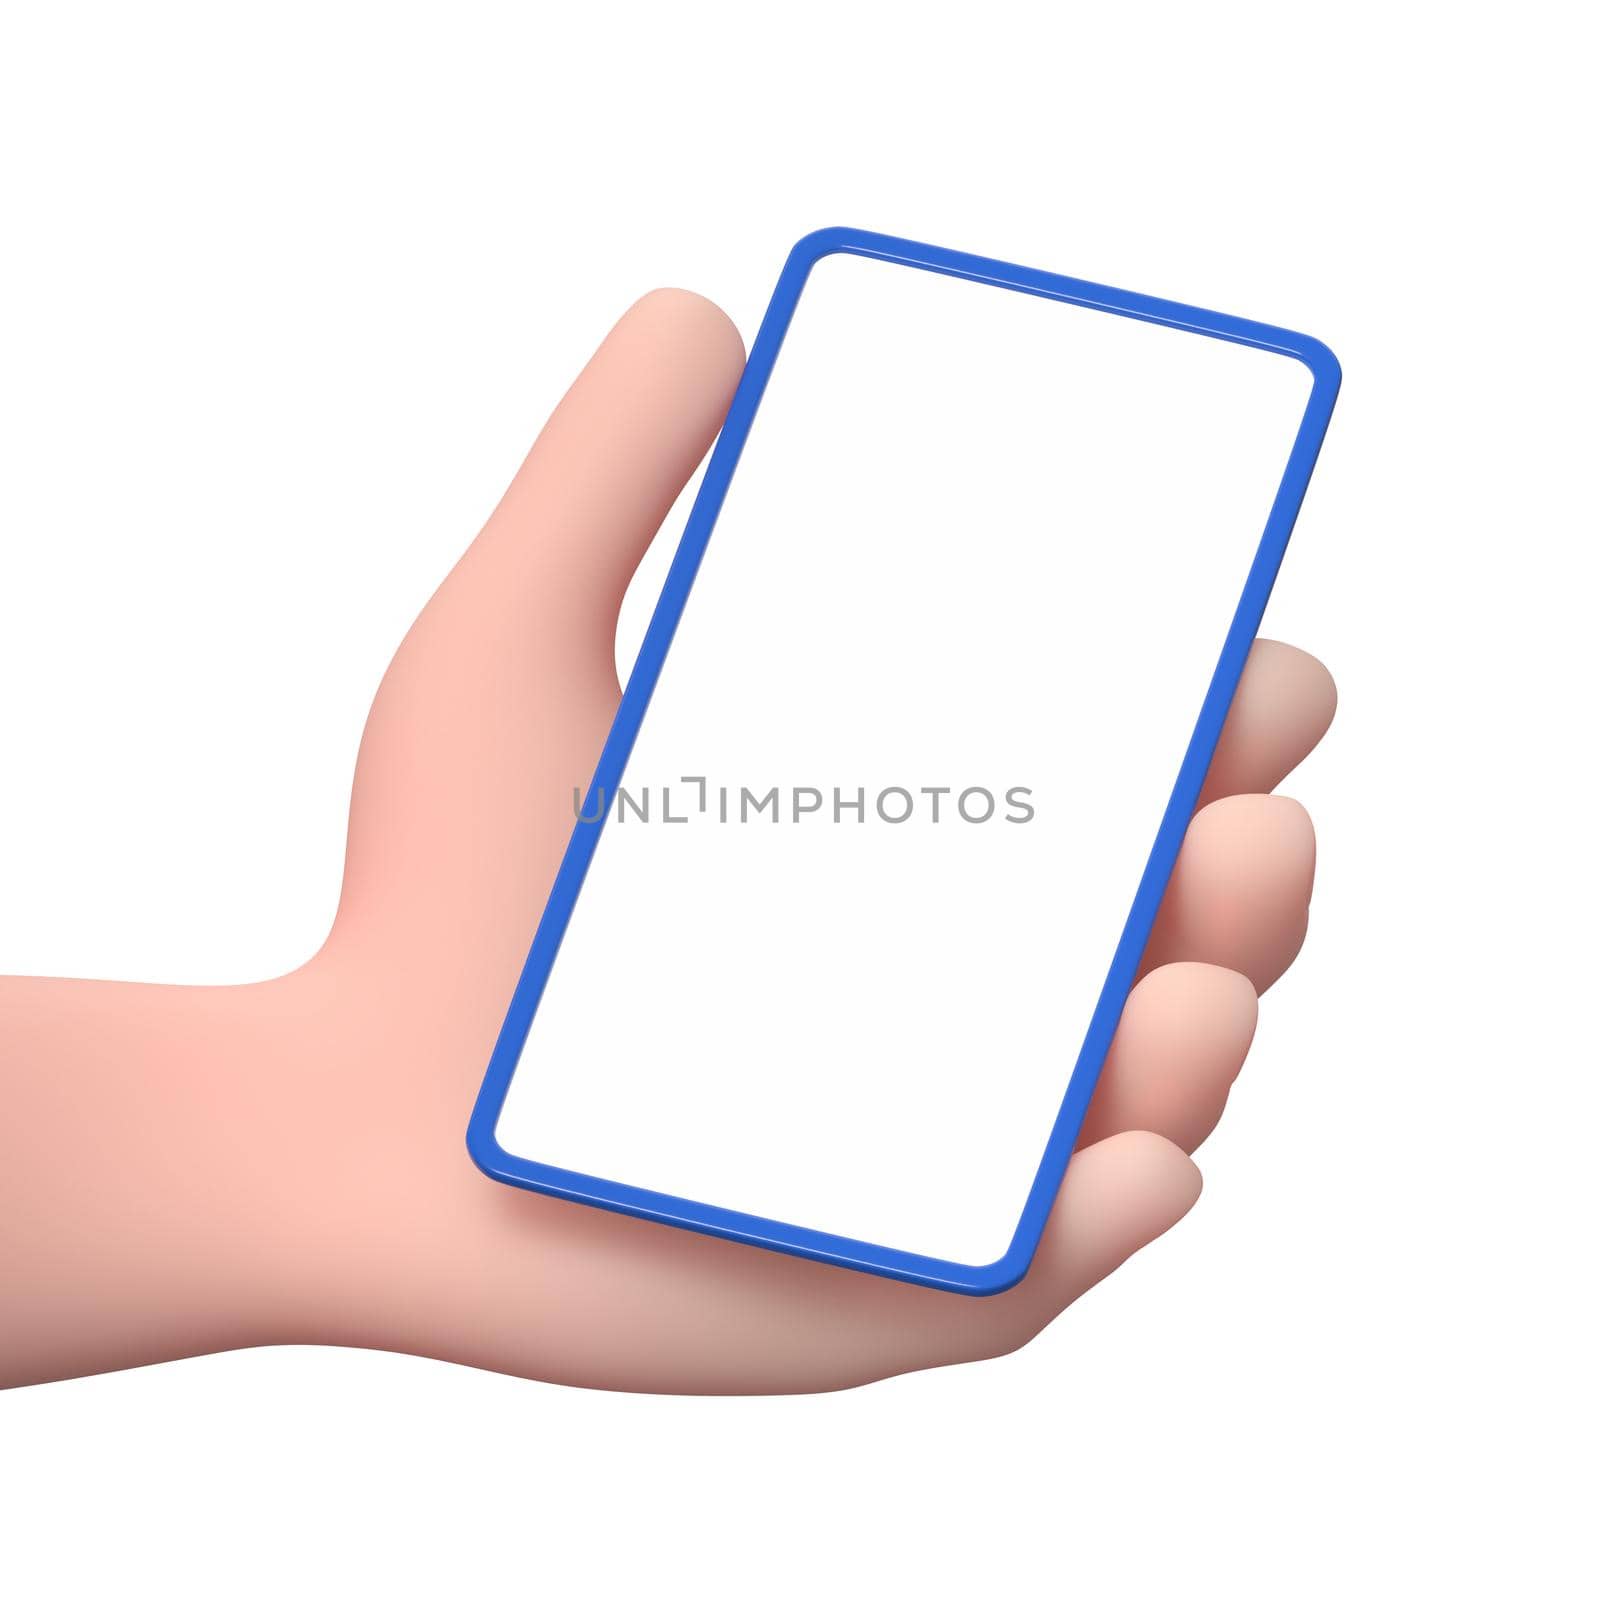 3D Cartoon Character Hand Holding a Phone with White Blank Screen Isolated on White Background 3D Illustration